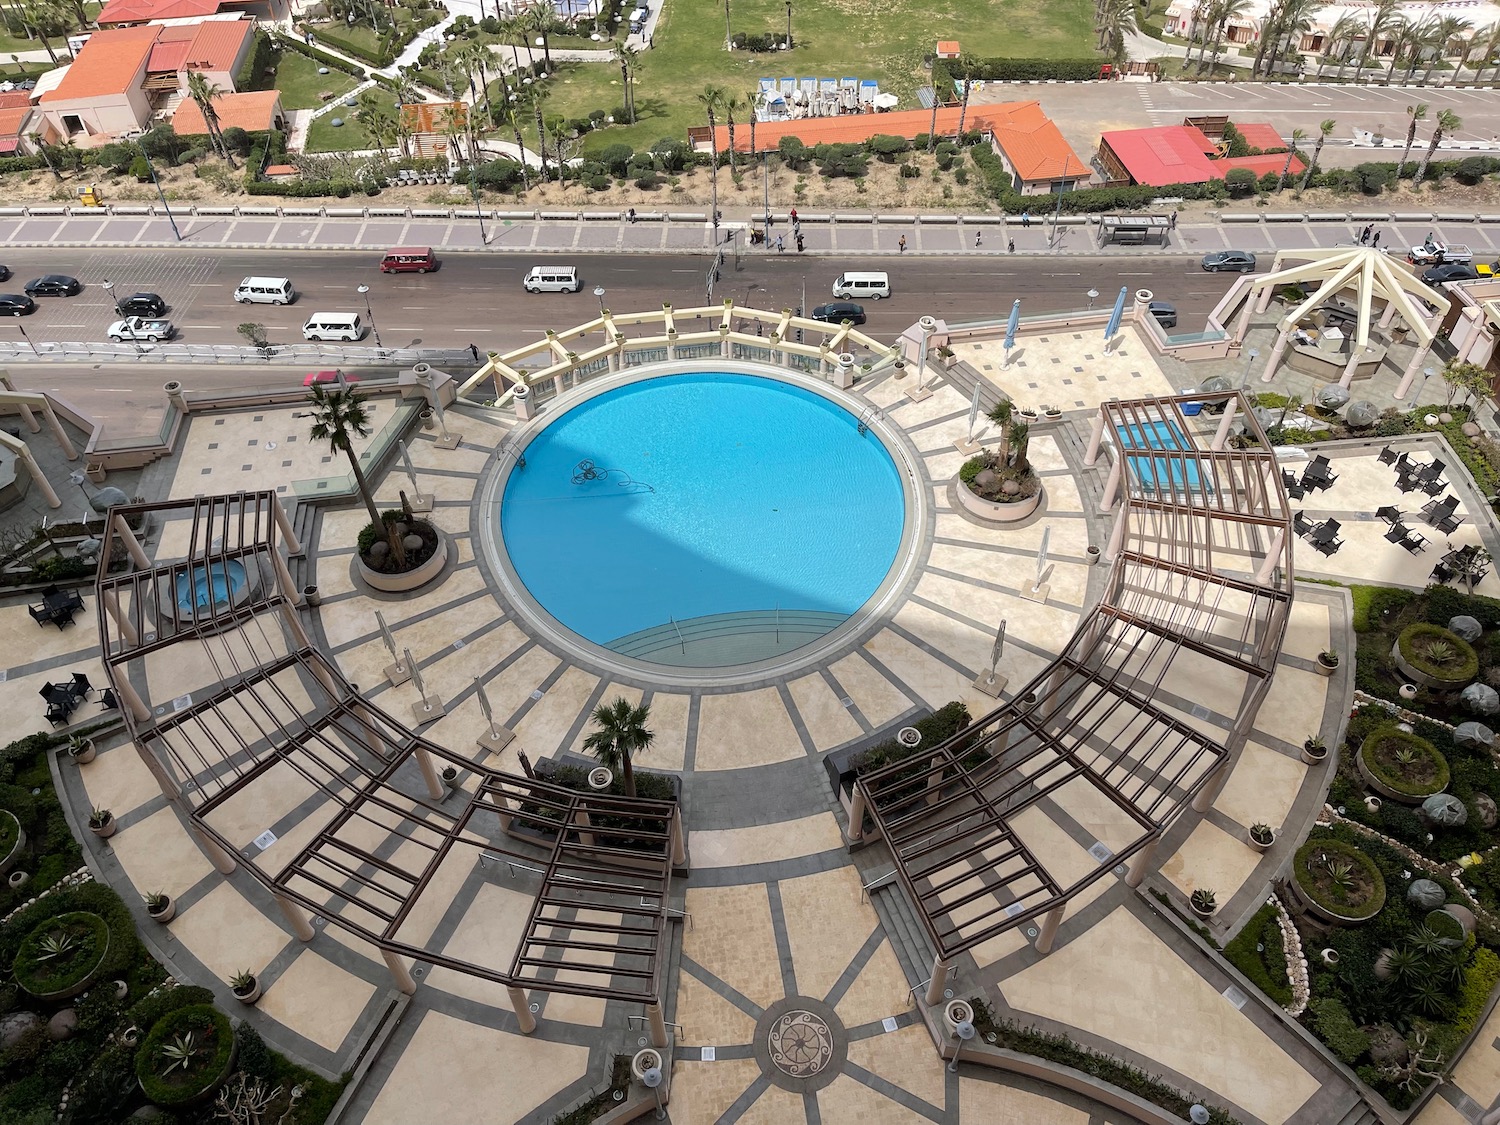 a pool with a circular structure and a road with cars and buildings